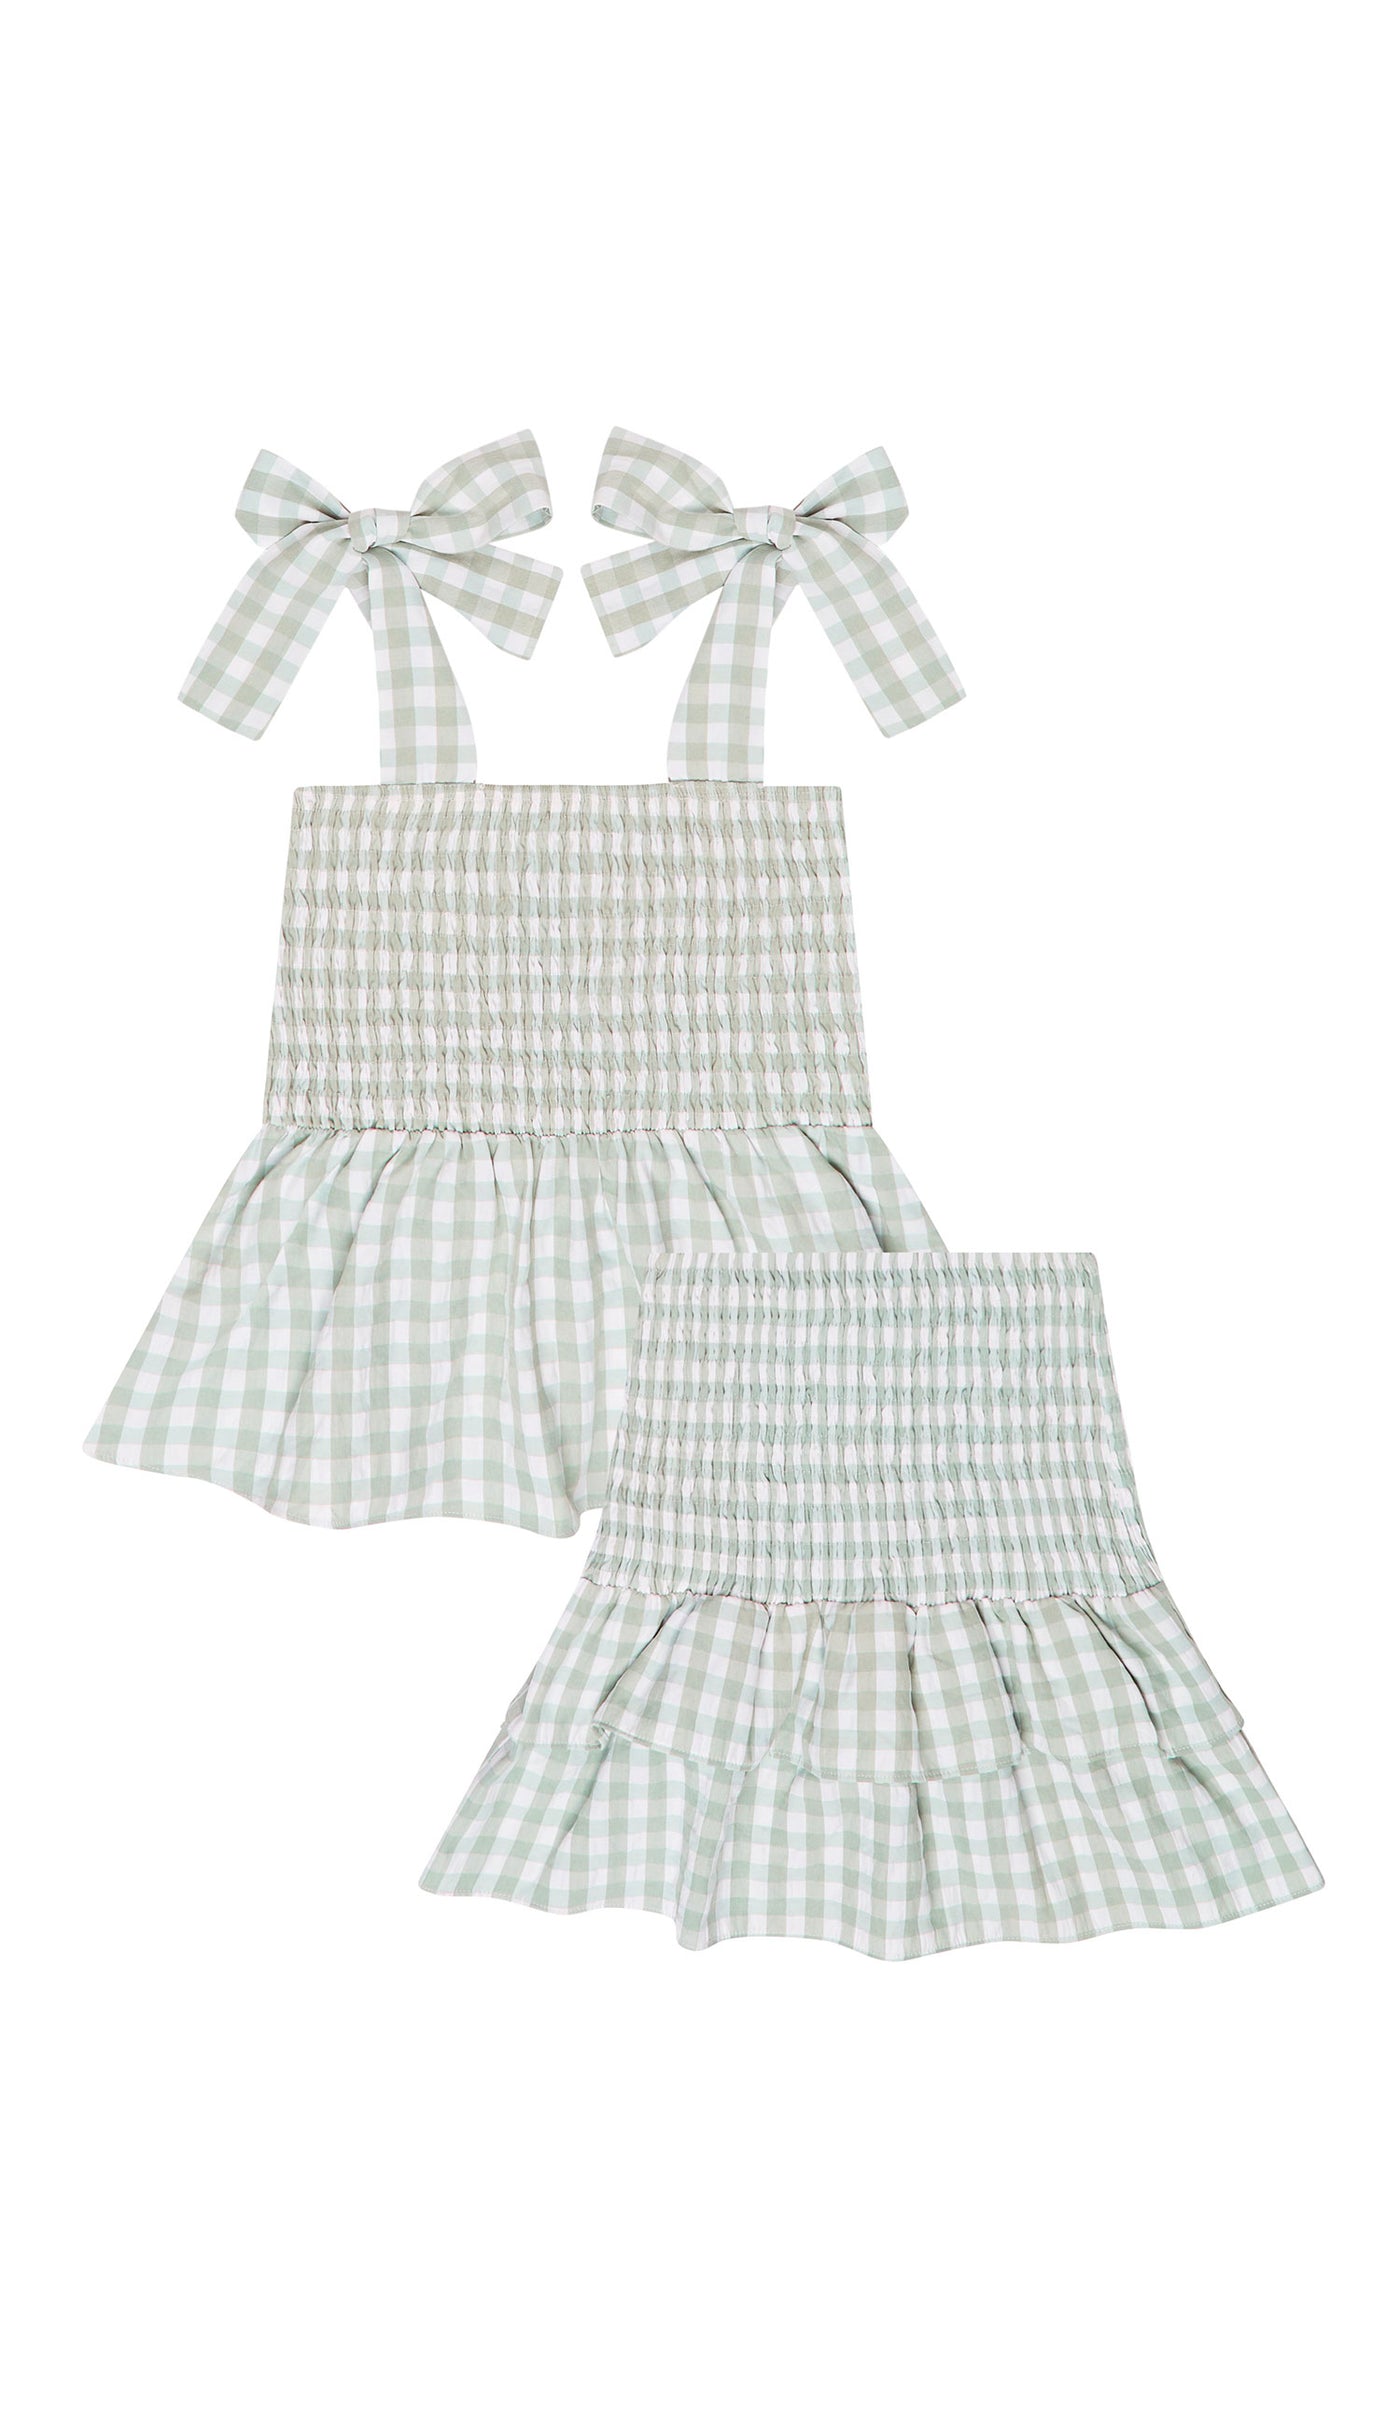 Green and white gingham top and skirt